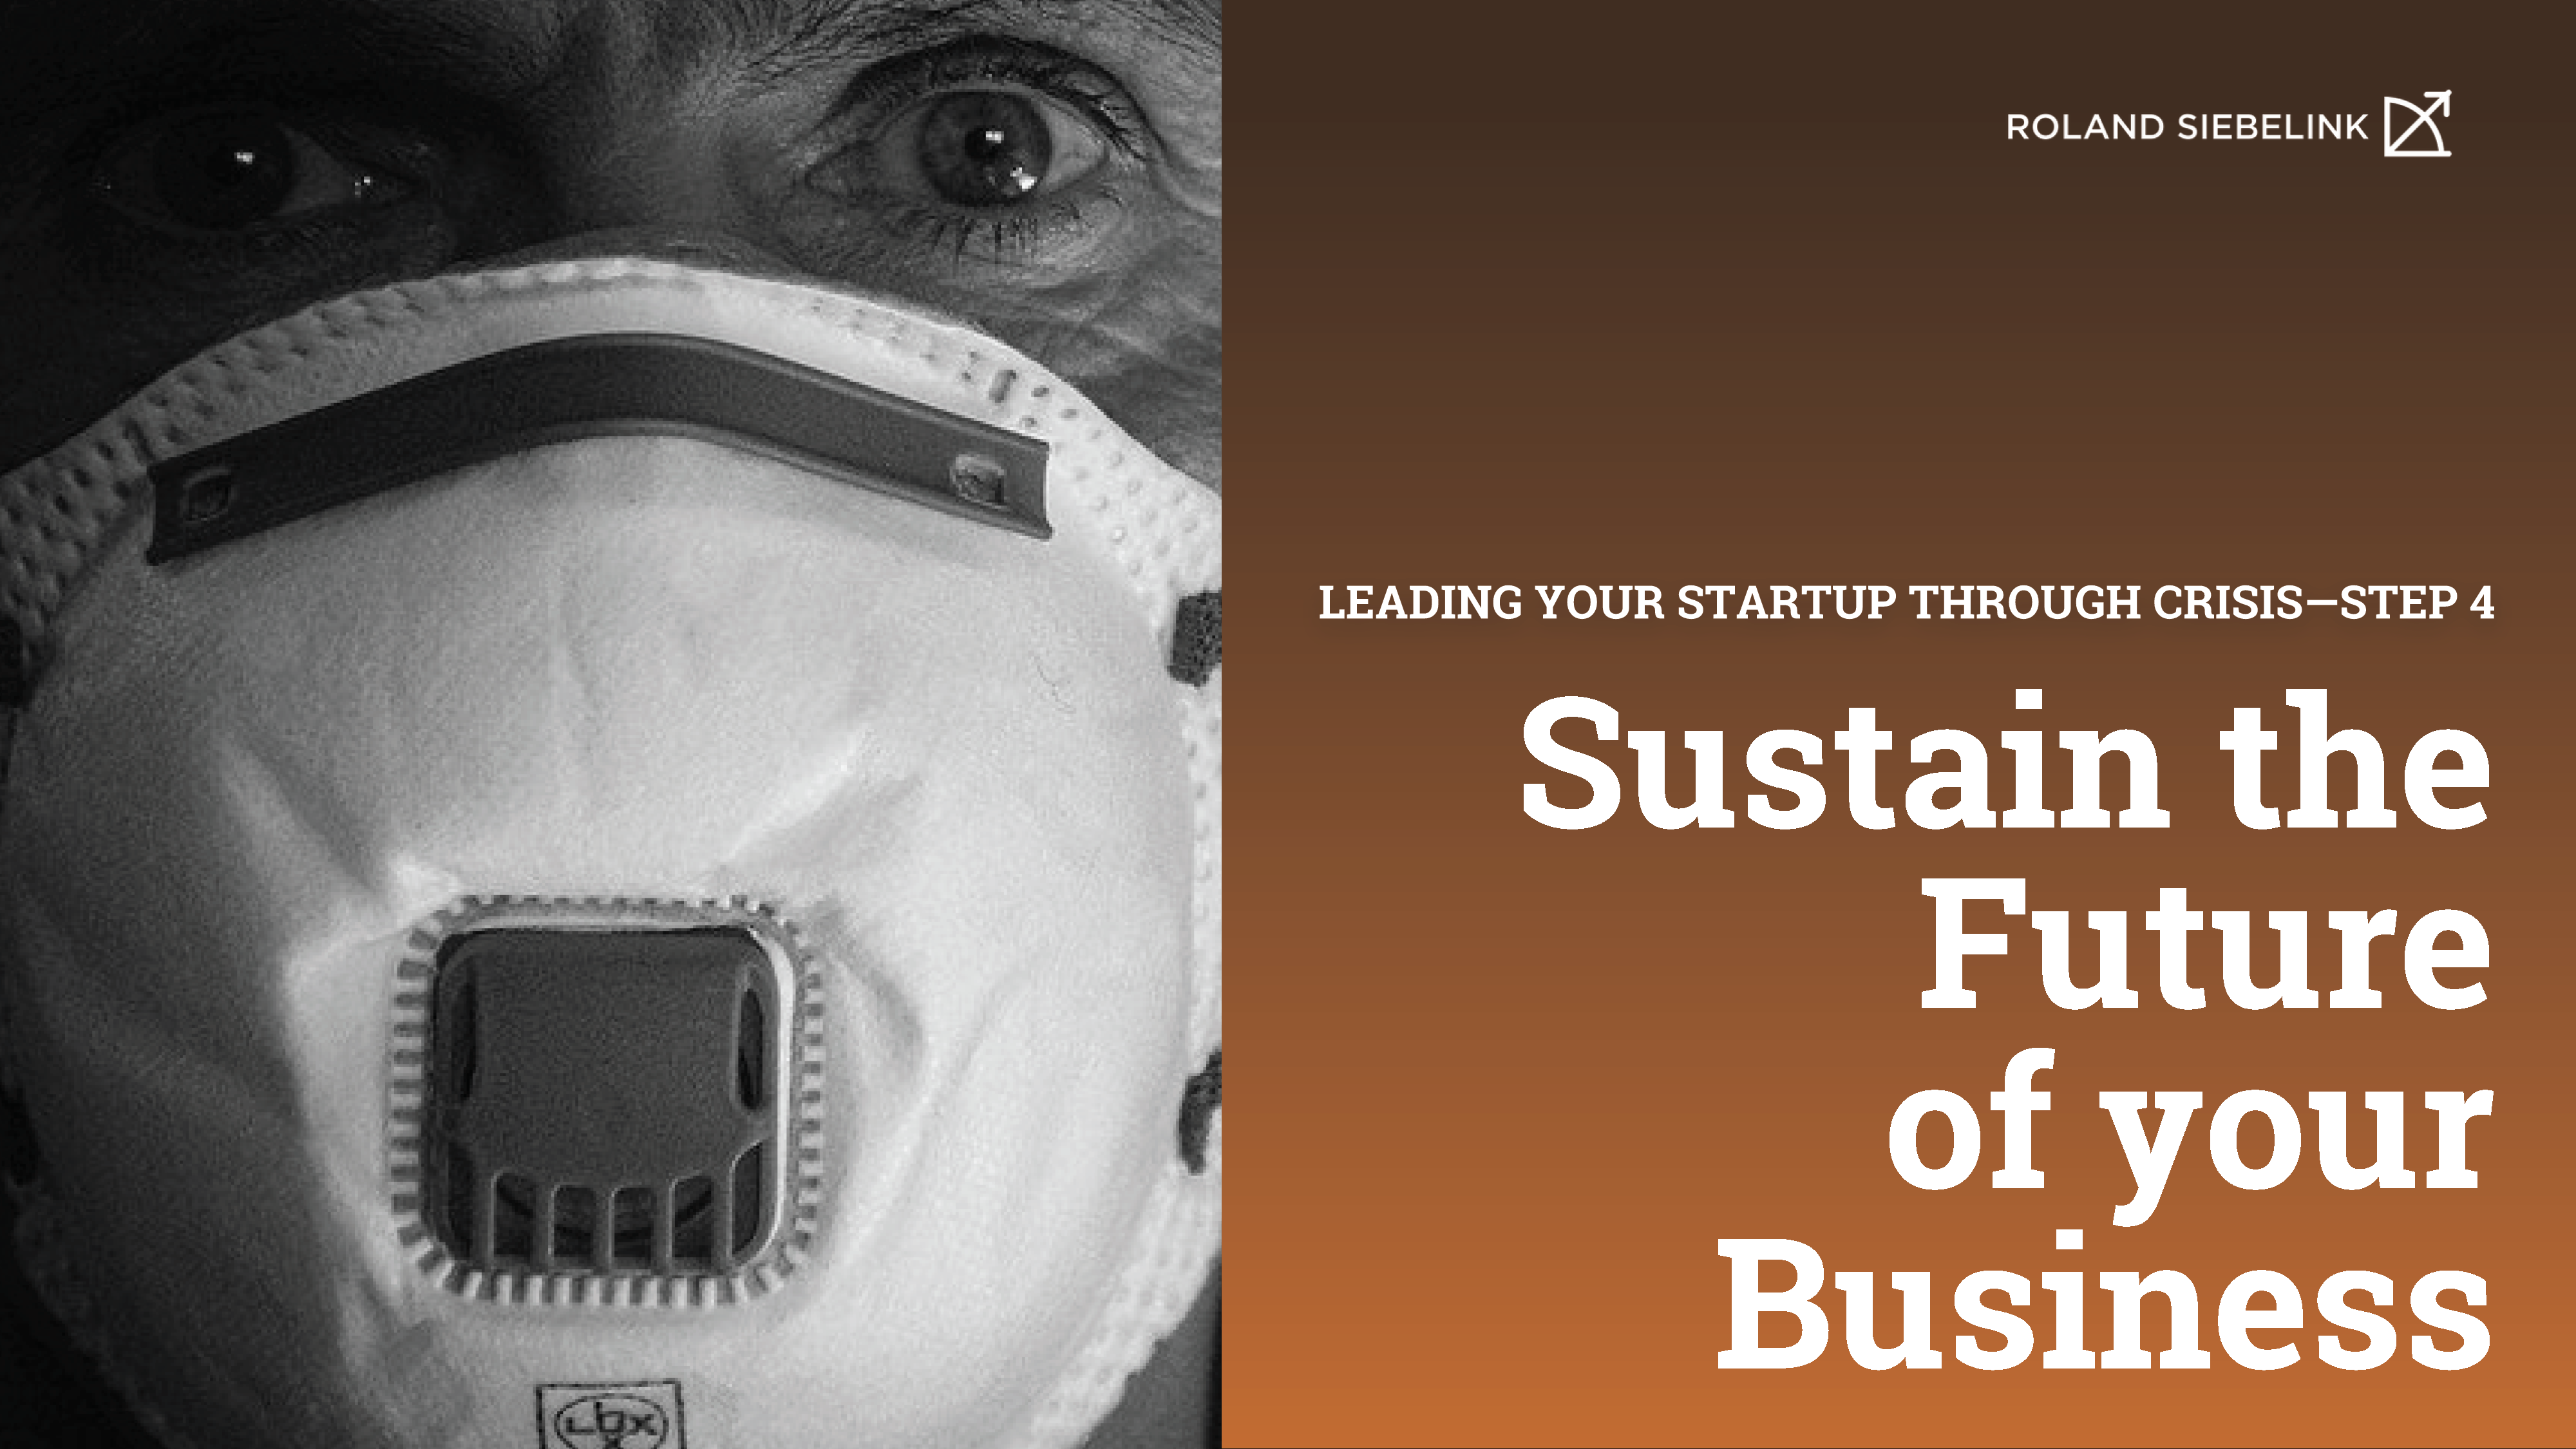 Sustain the Future of your Business Securing Tomorrow: Strategic Steps to Sustain Your Startup in Times of Crisis